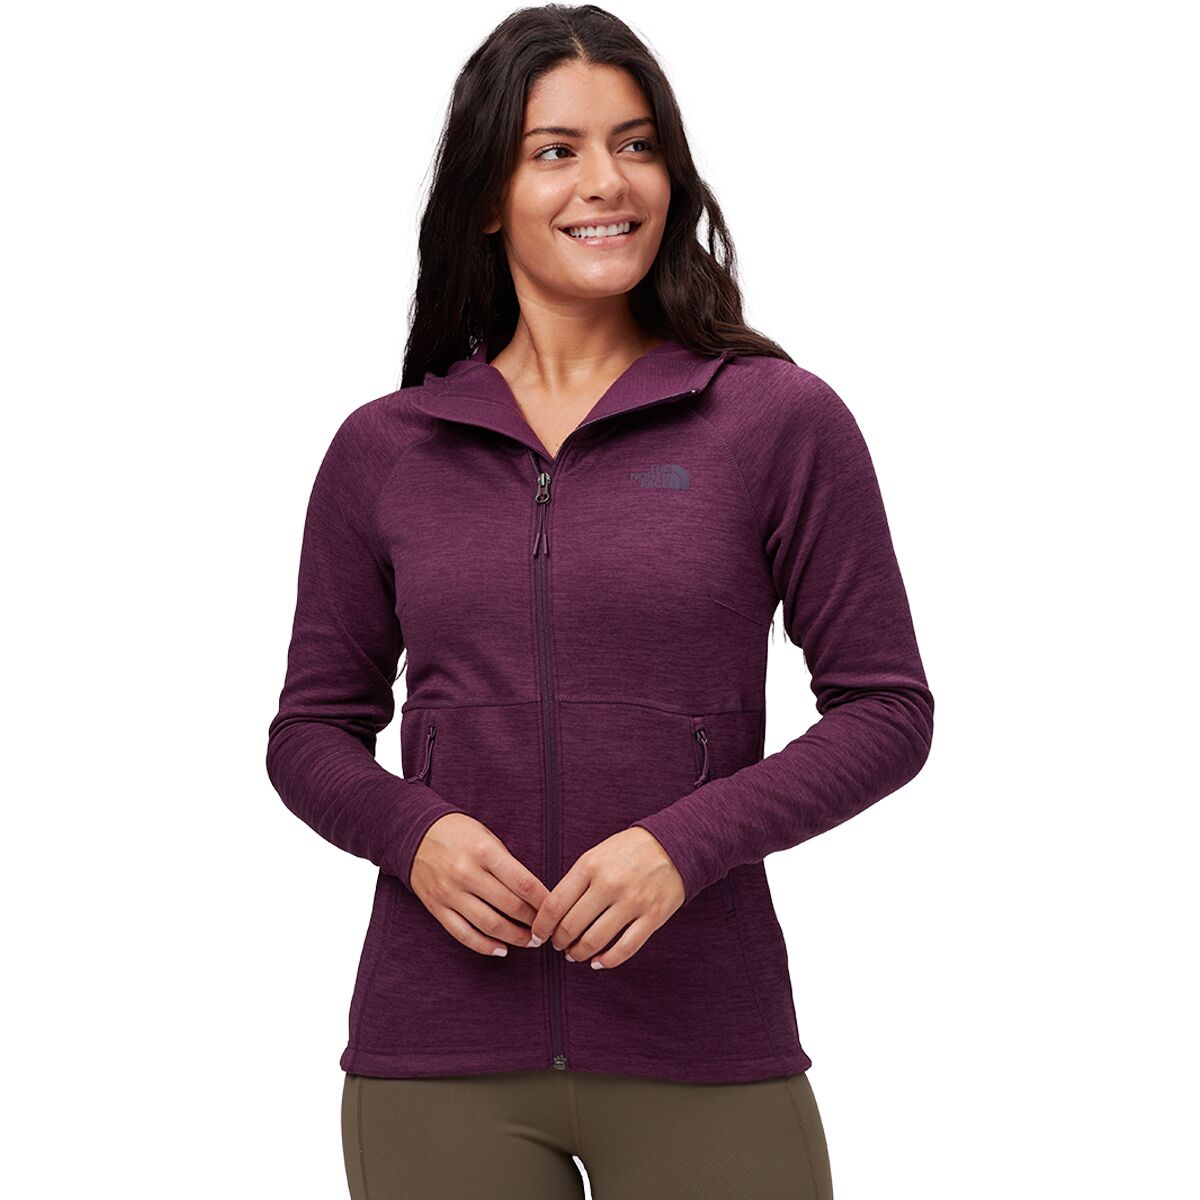 The North Face Canyonlands Hooded Fleece Jacket - Women's